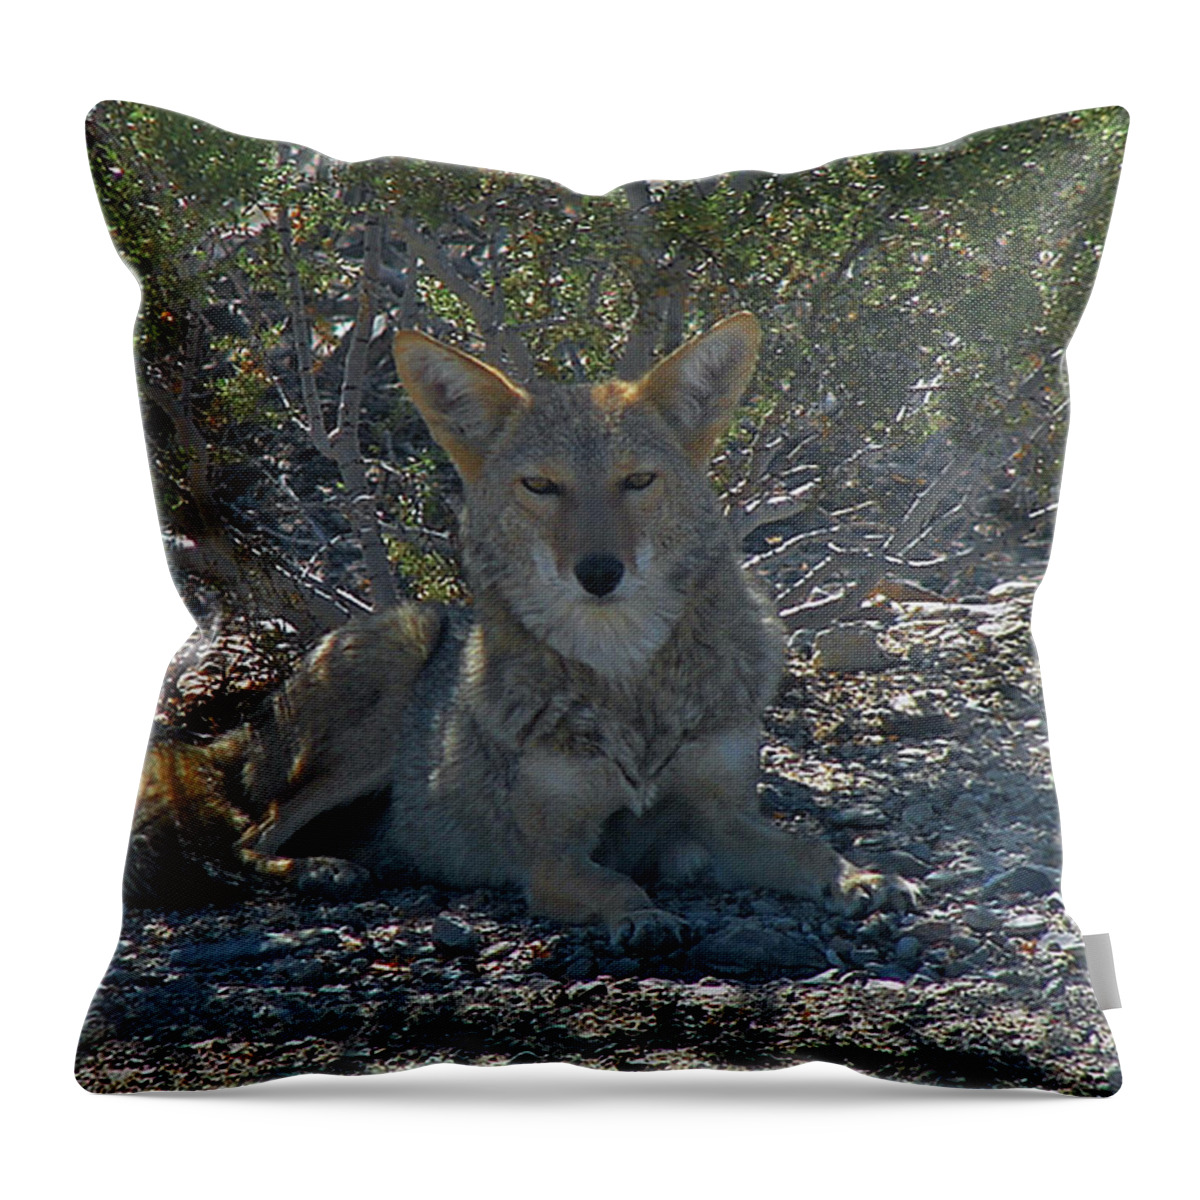 Coyote Throw Pillow featuring the photograph Coyote 2 by Carl Moore